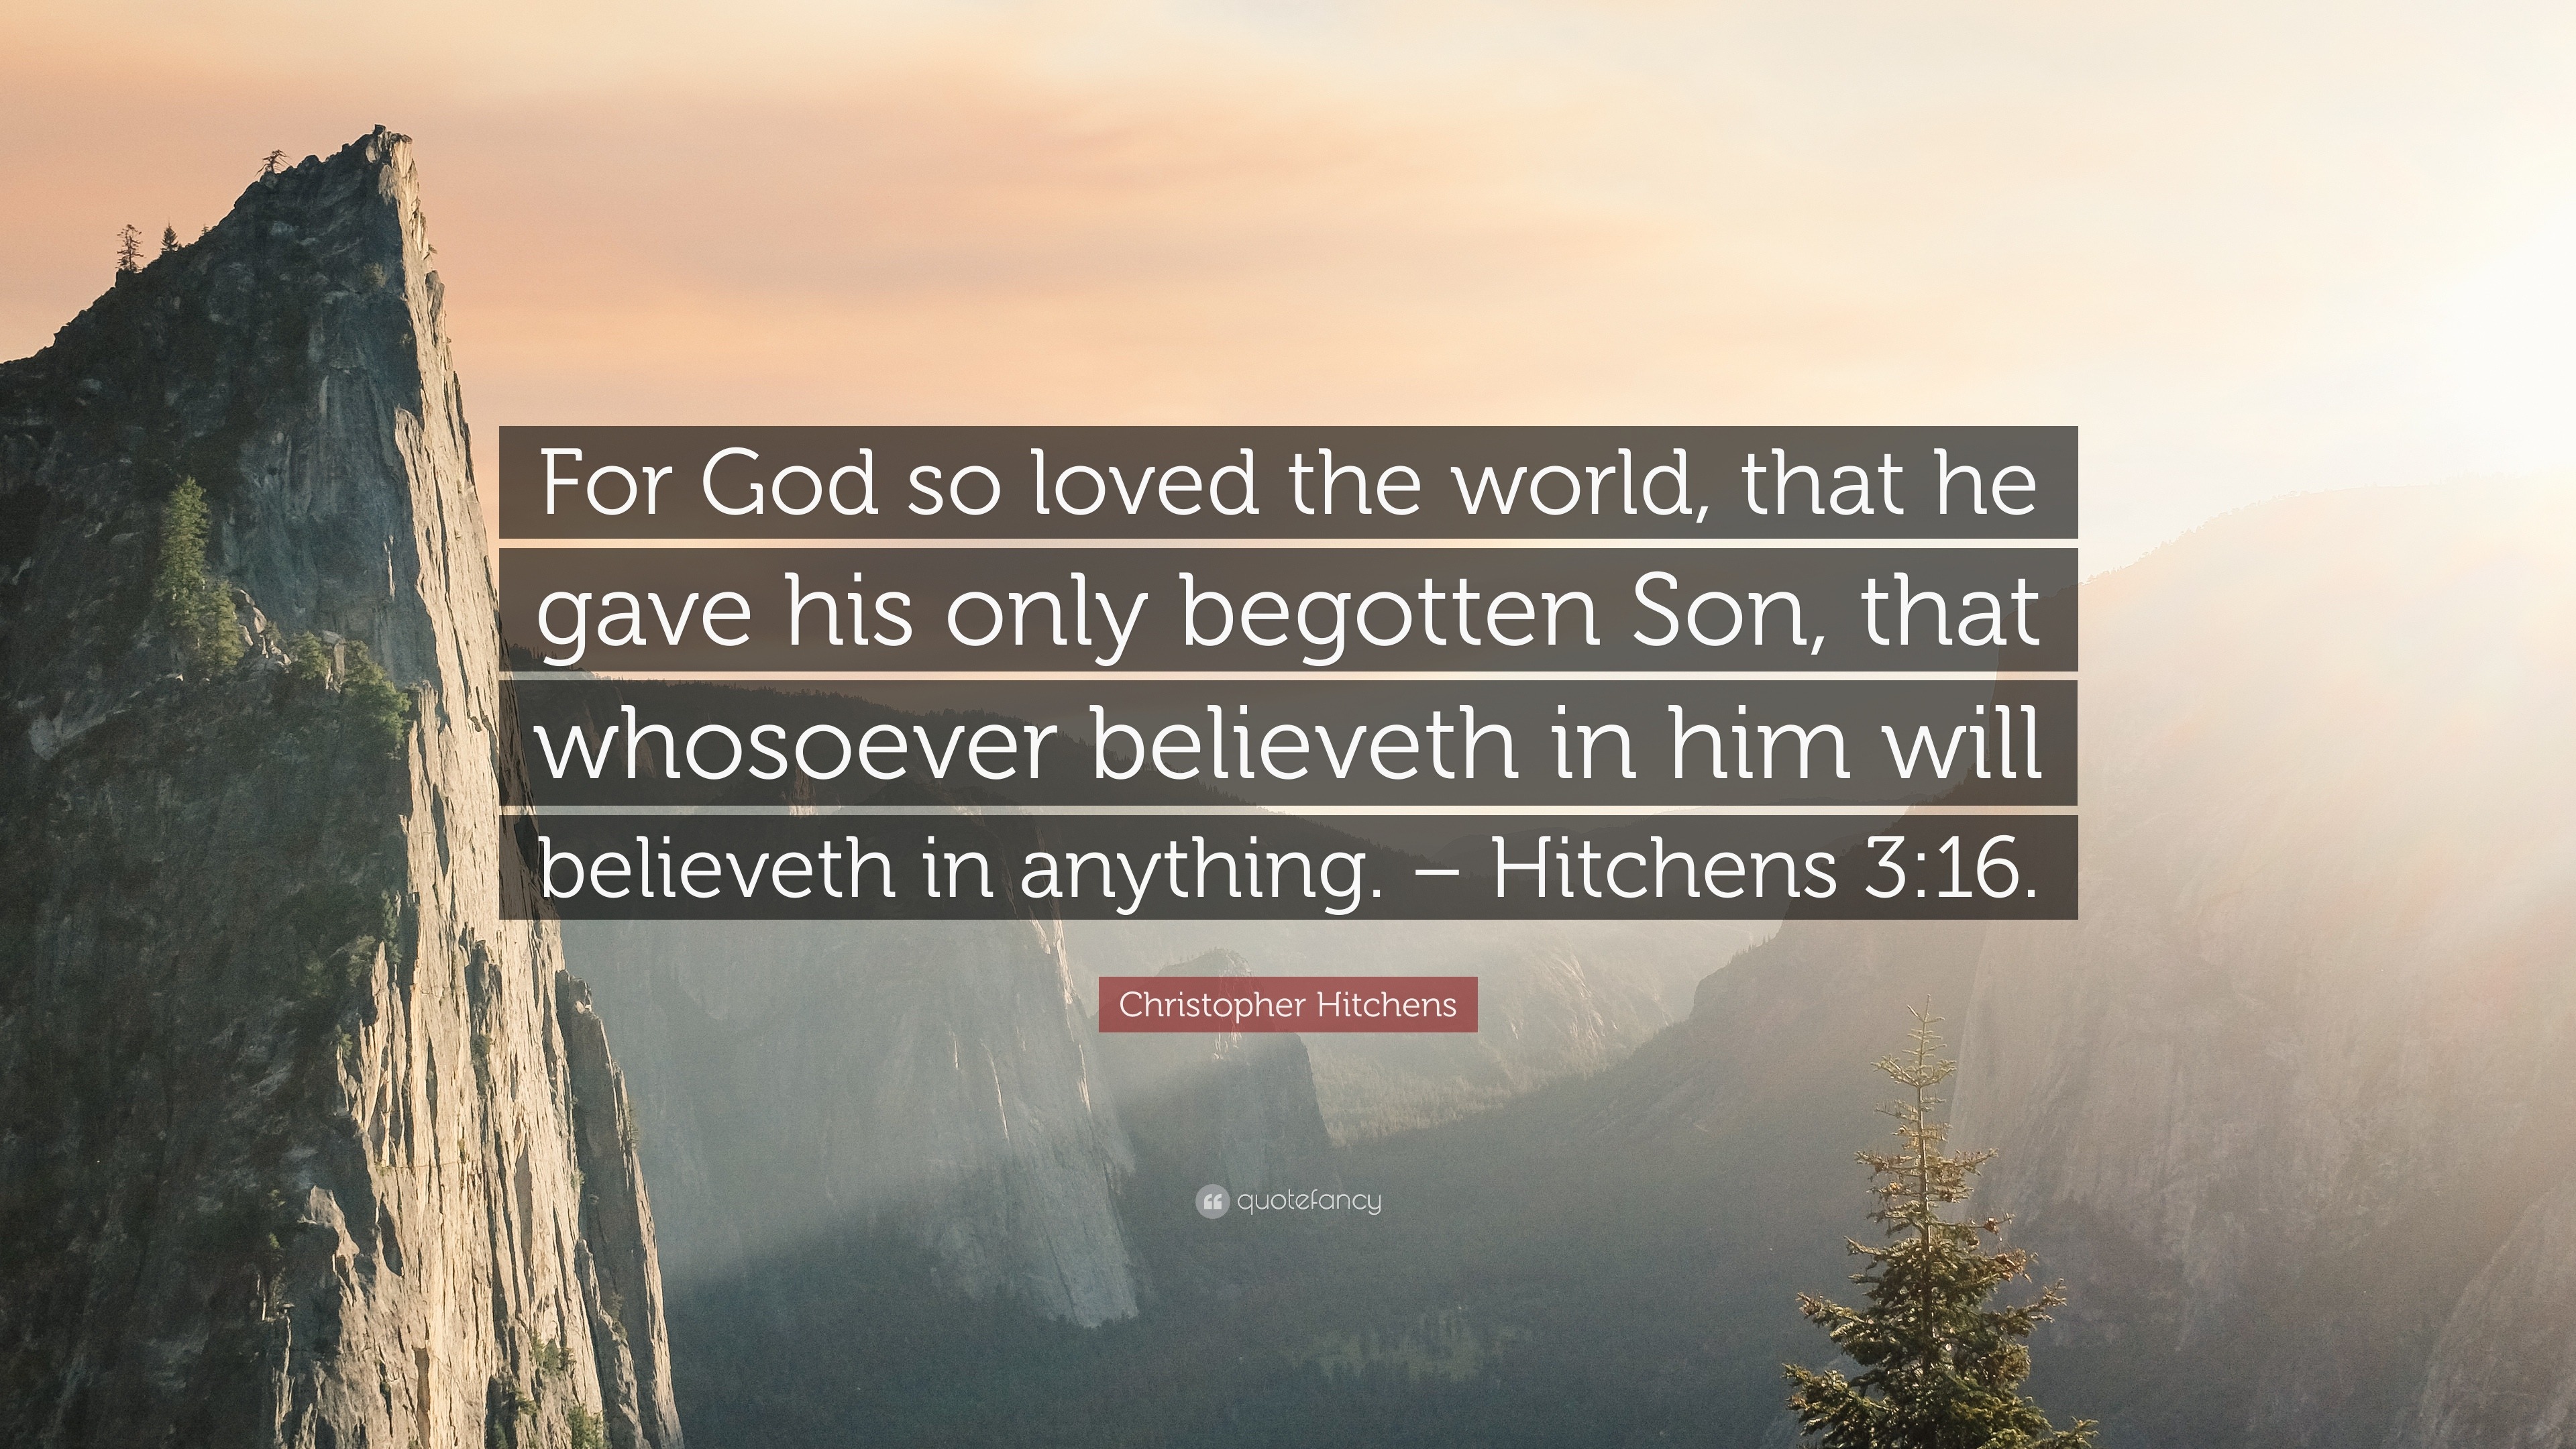 Christopher Hitchens Quote “For God so loved the world that he gave his